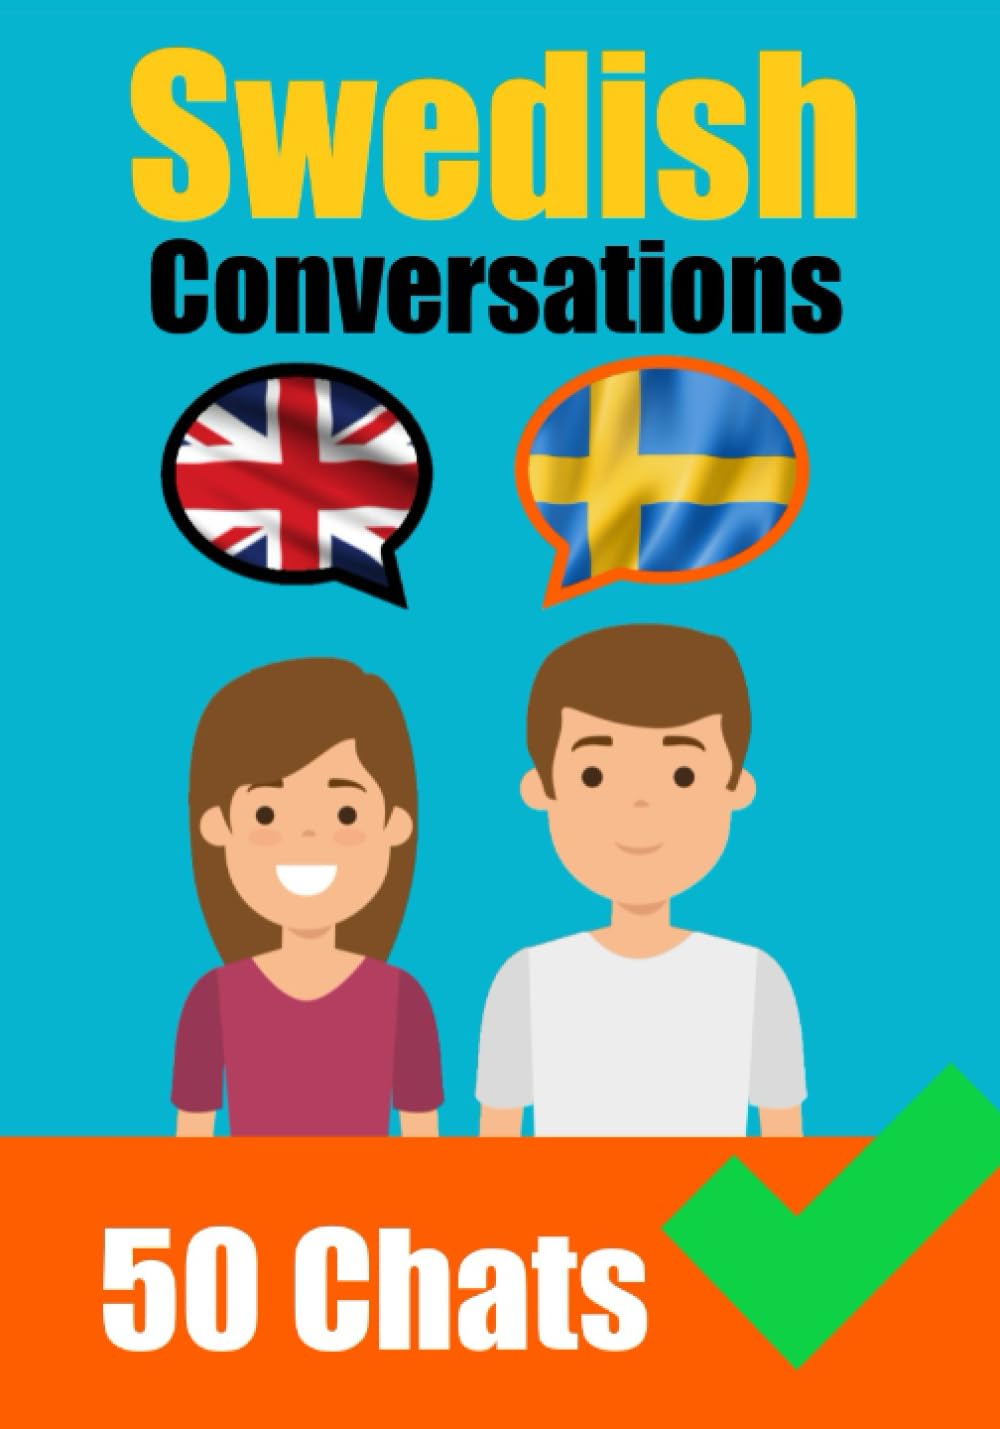 Conversations in Swedish | English and Swedish Conversations Side by Side